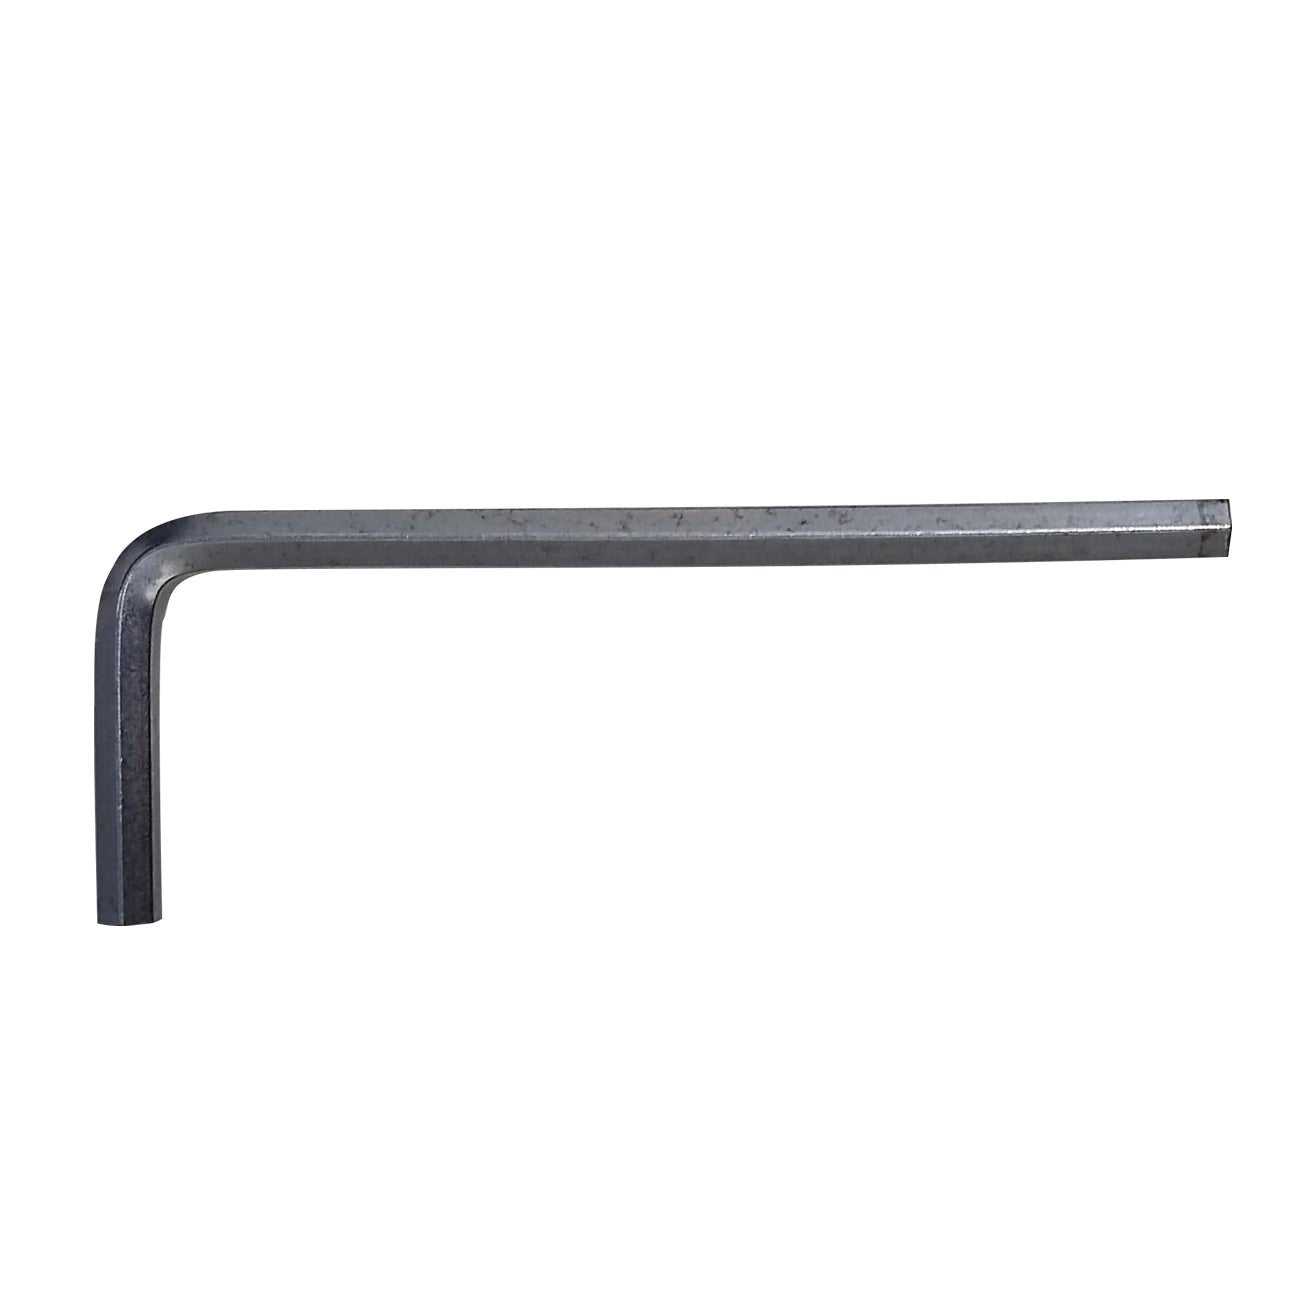 4mm Allen Wrench for Electric Scooters - GOTRAX